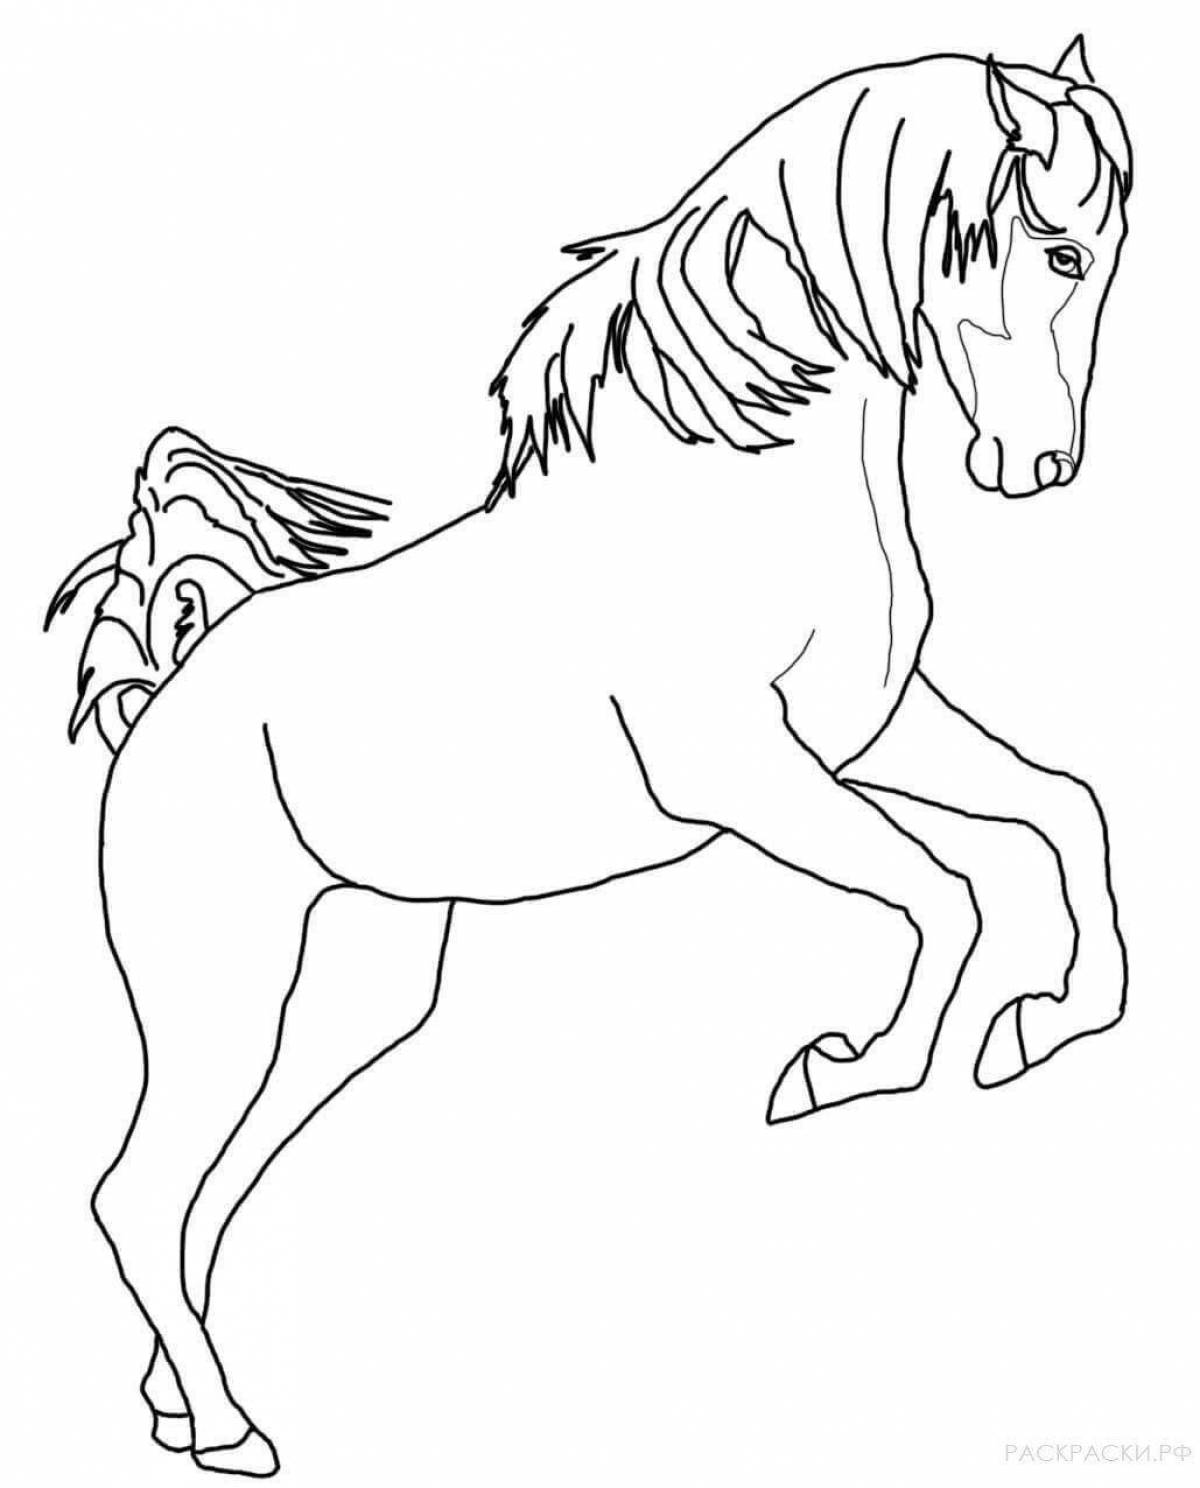 Major horse coloring book for 6-7 year olds